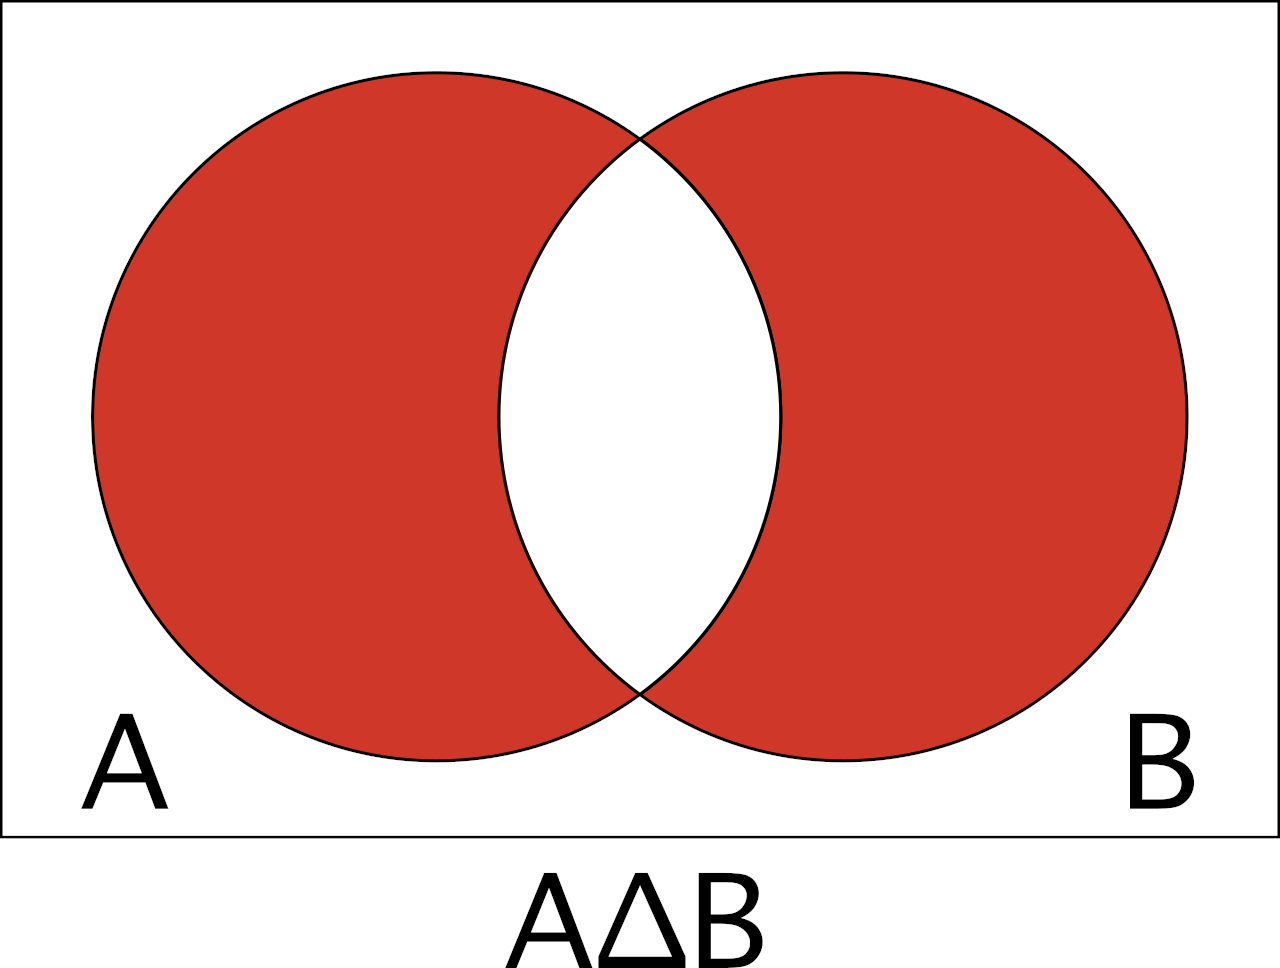 Venn diagram to help visualize the symmetric difference of A and B